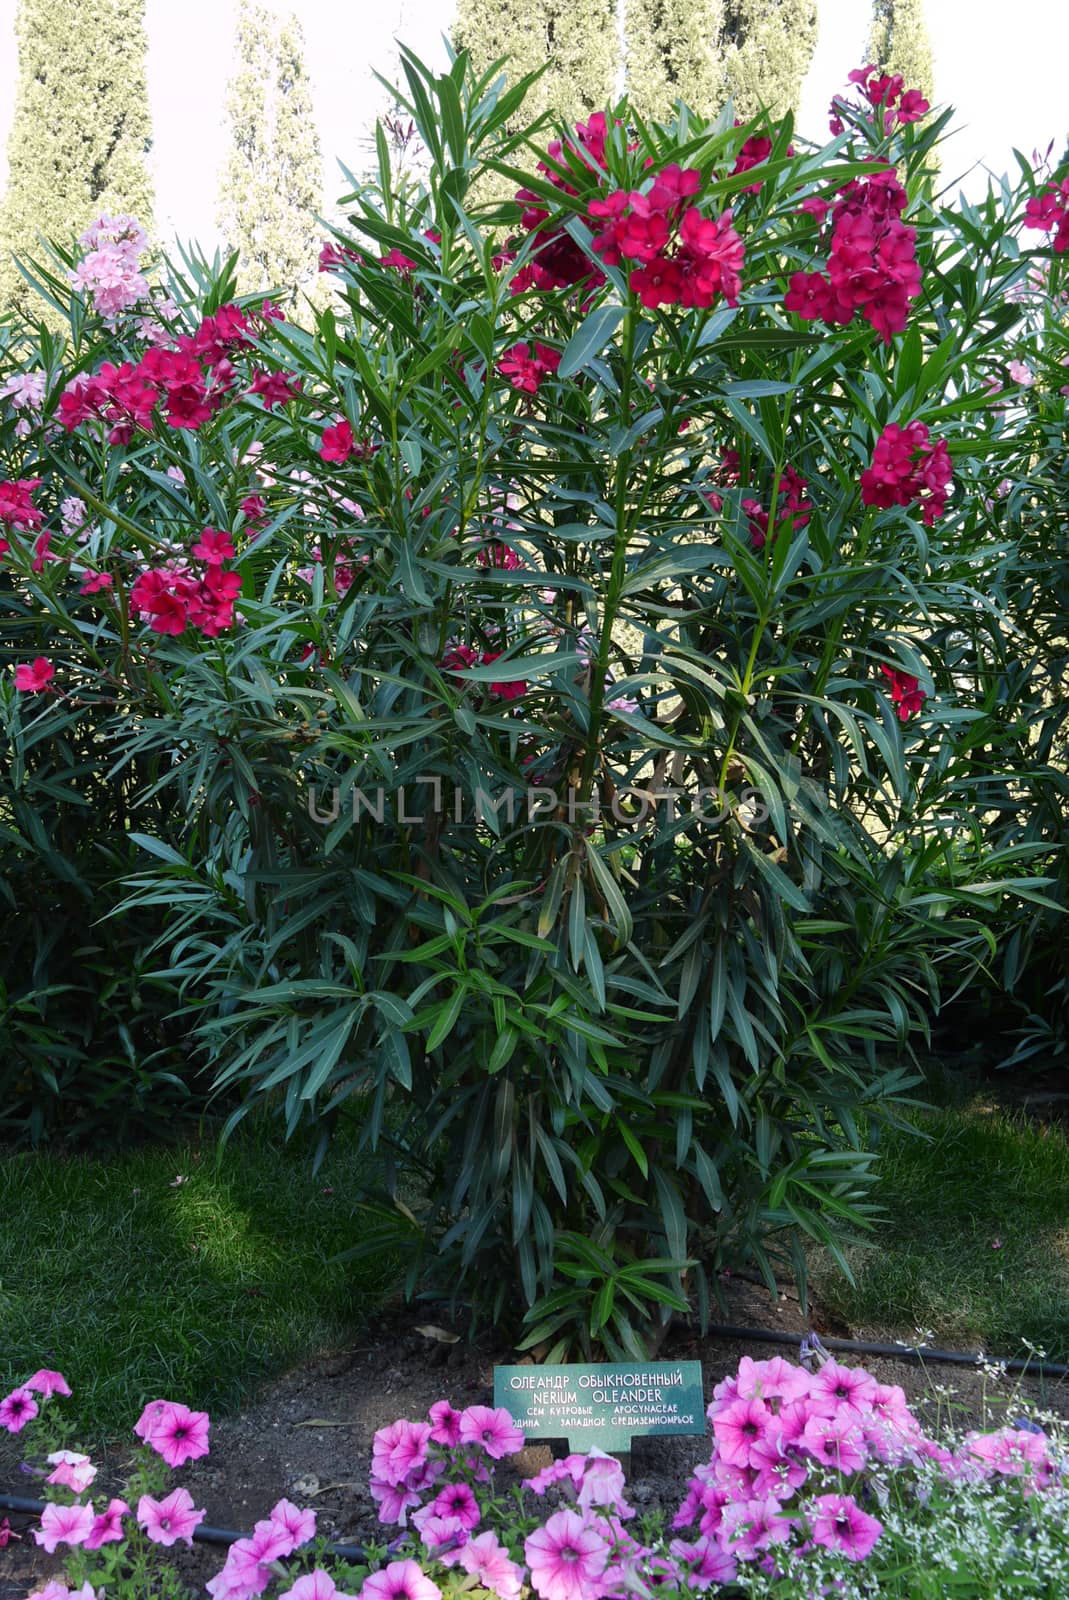 A tall bush with long stems and green leaves of beautiful red fl by Adamchuk